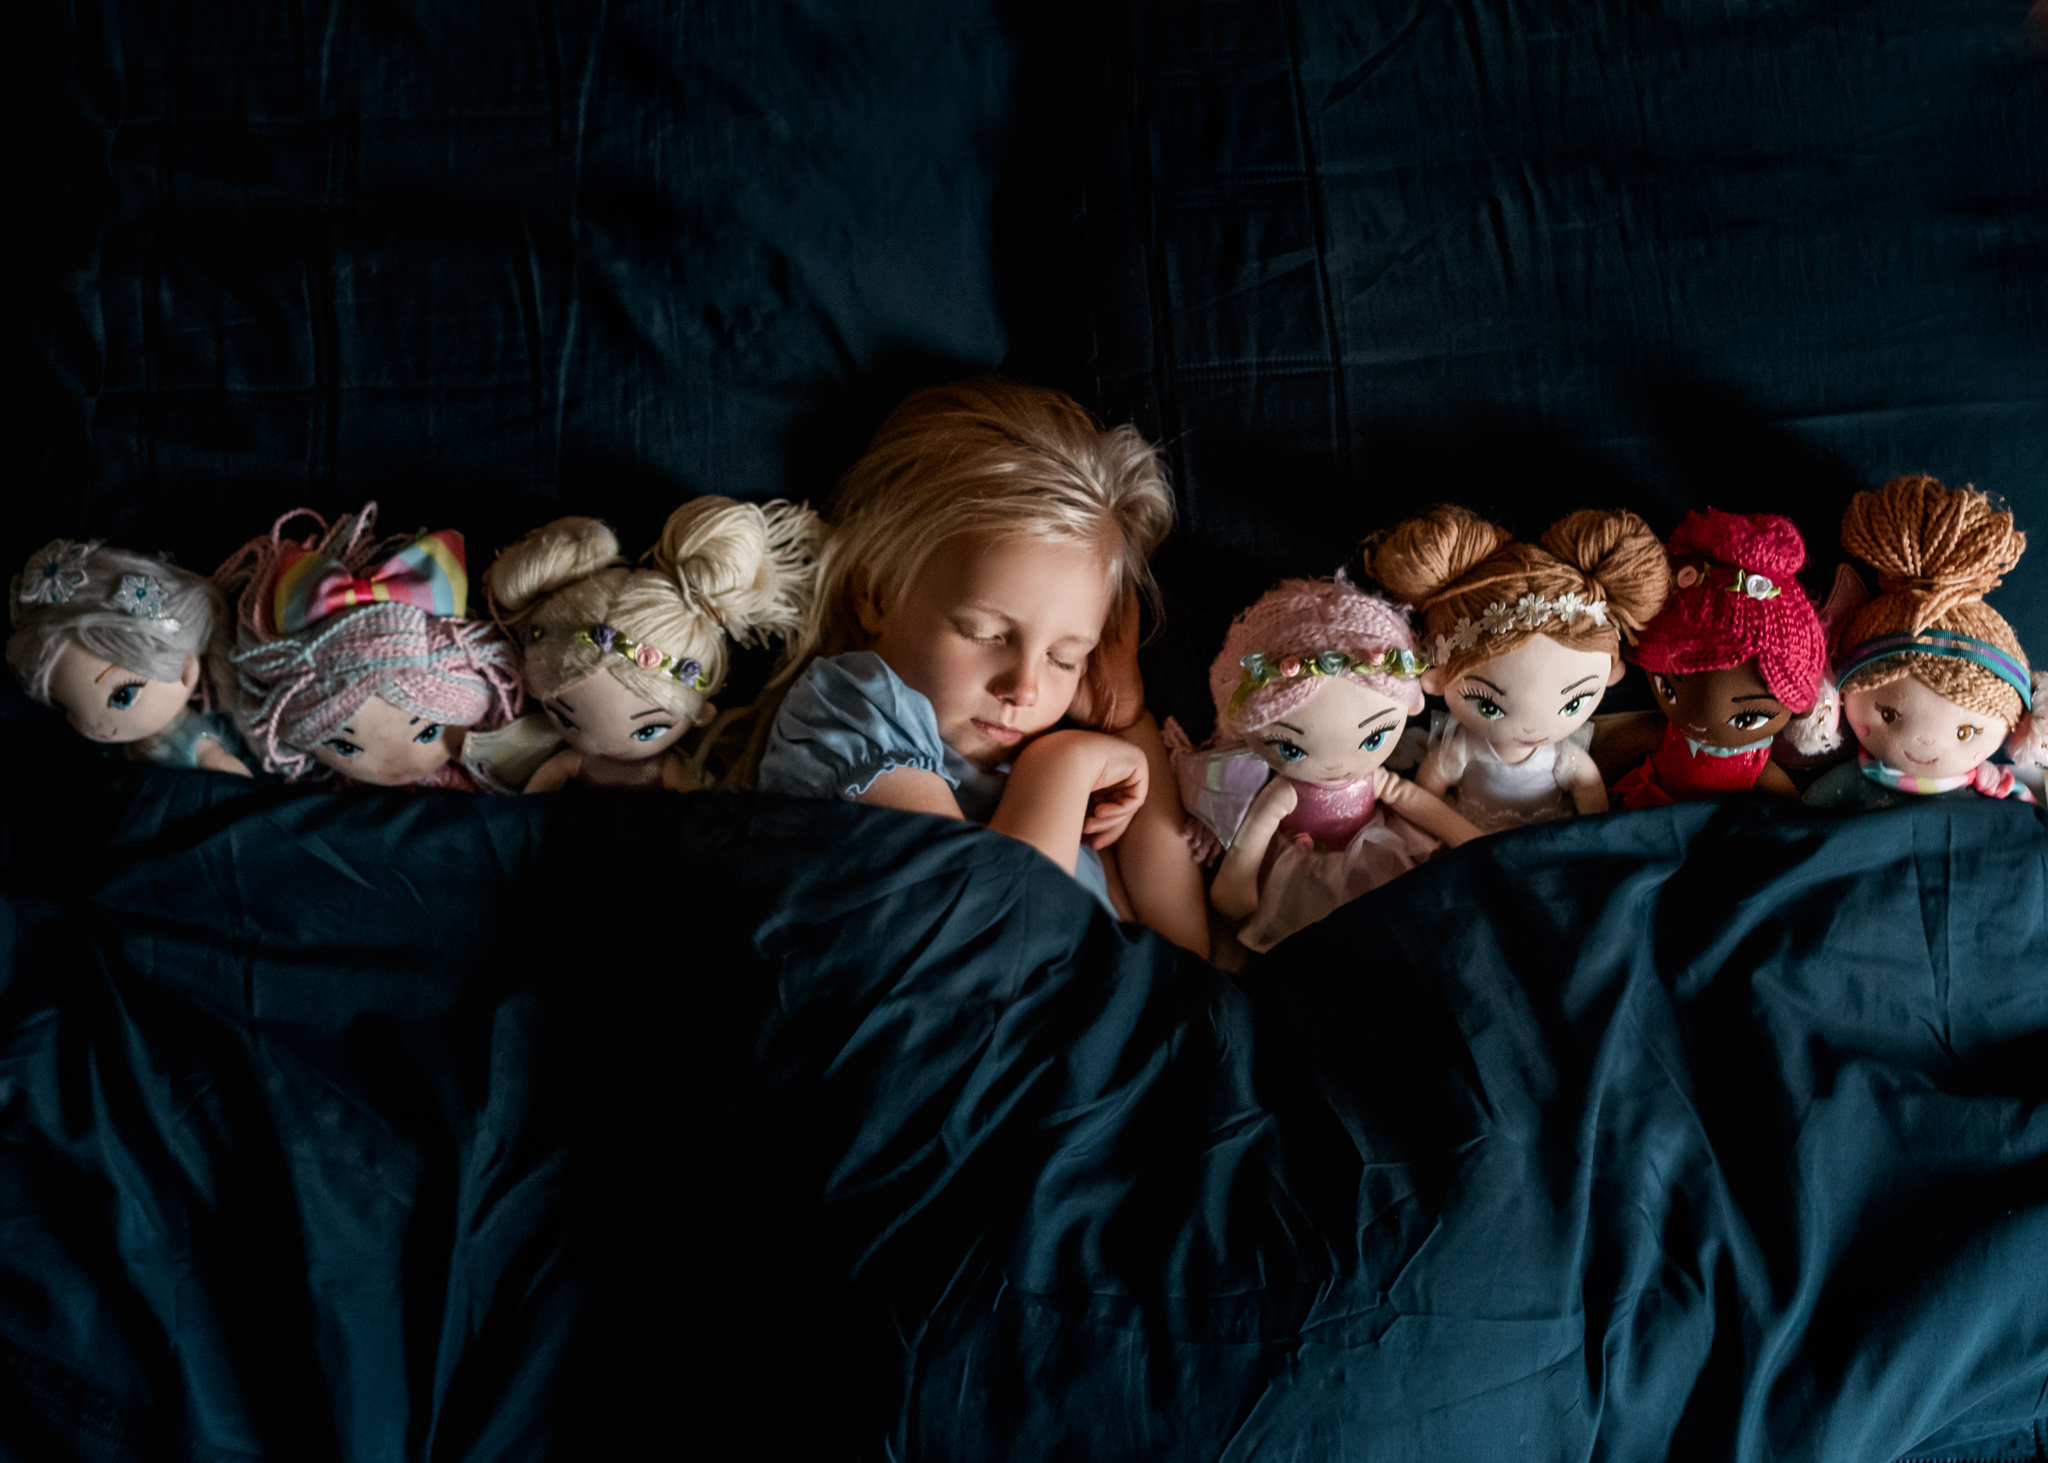 Beautiful Photos in Renovation Chaos - little girl sleeping with dolls